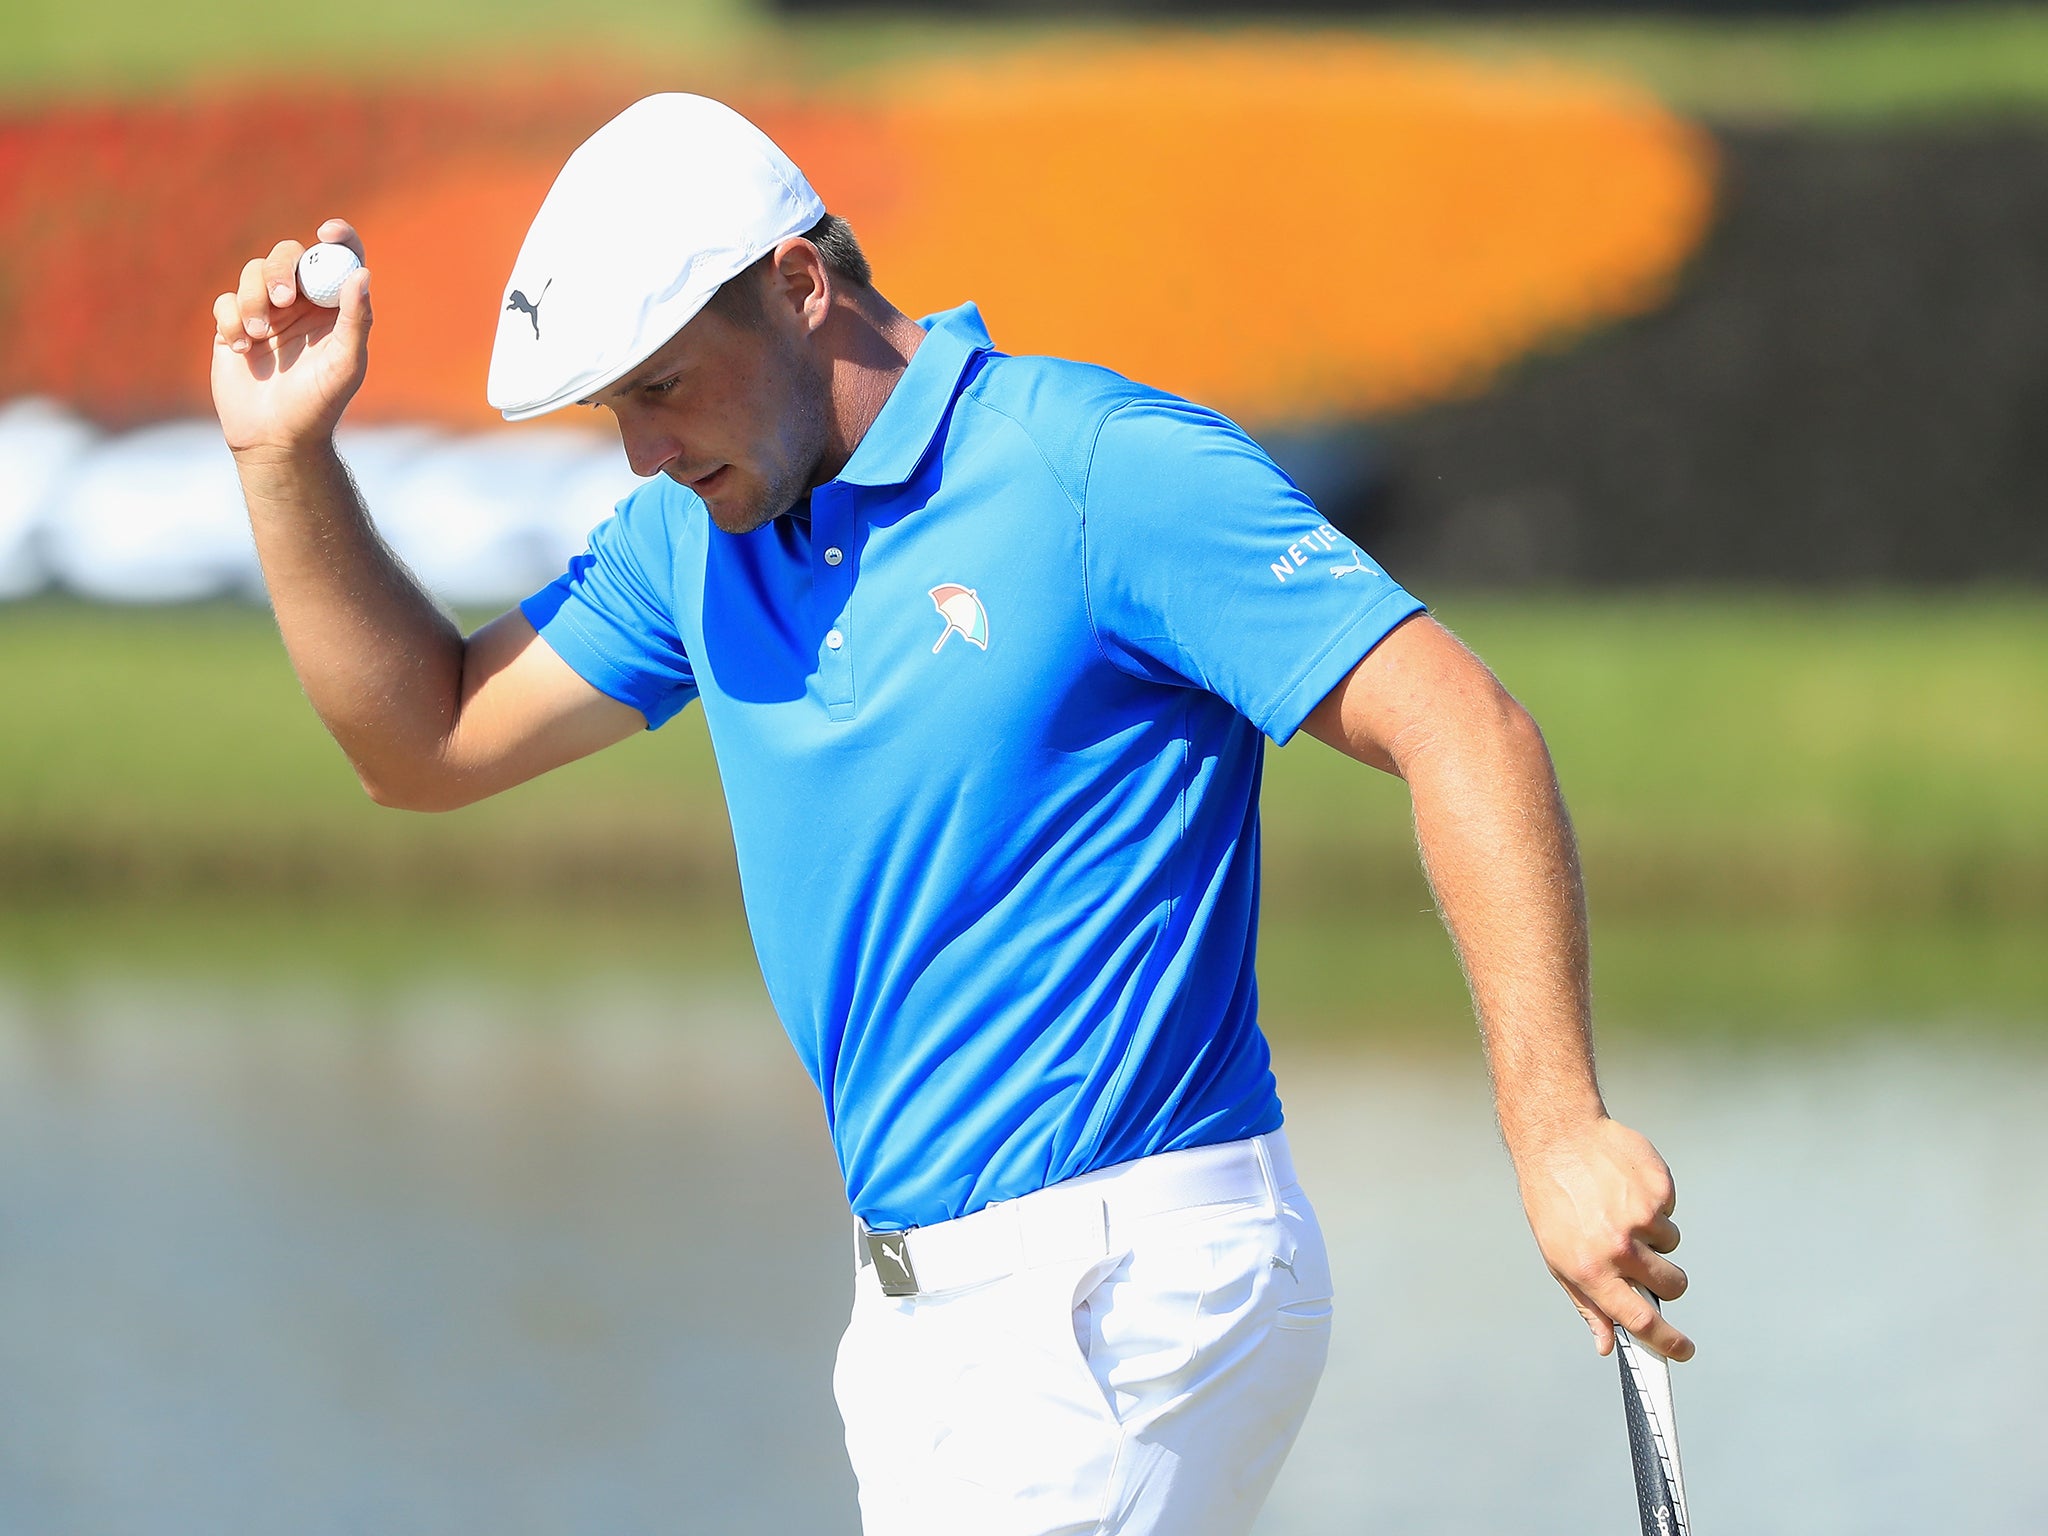 Bryson DeChambeau's eagle on 16 put late pressure on McIlroy but came to no avail